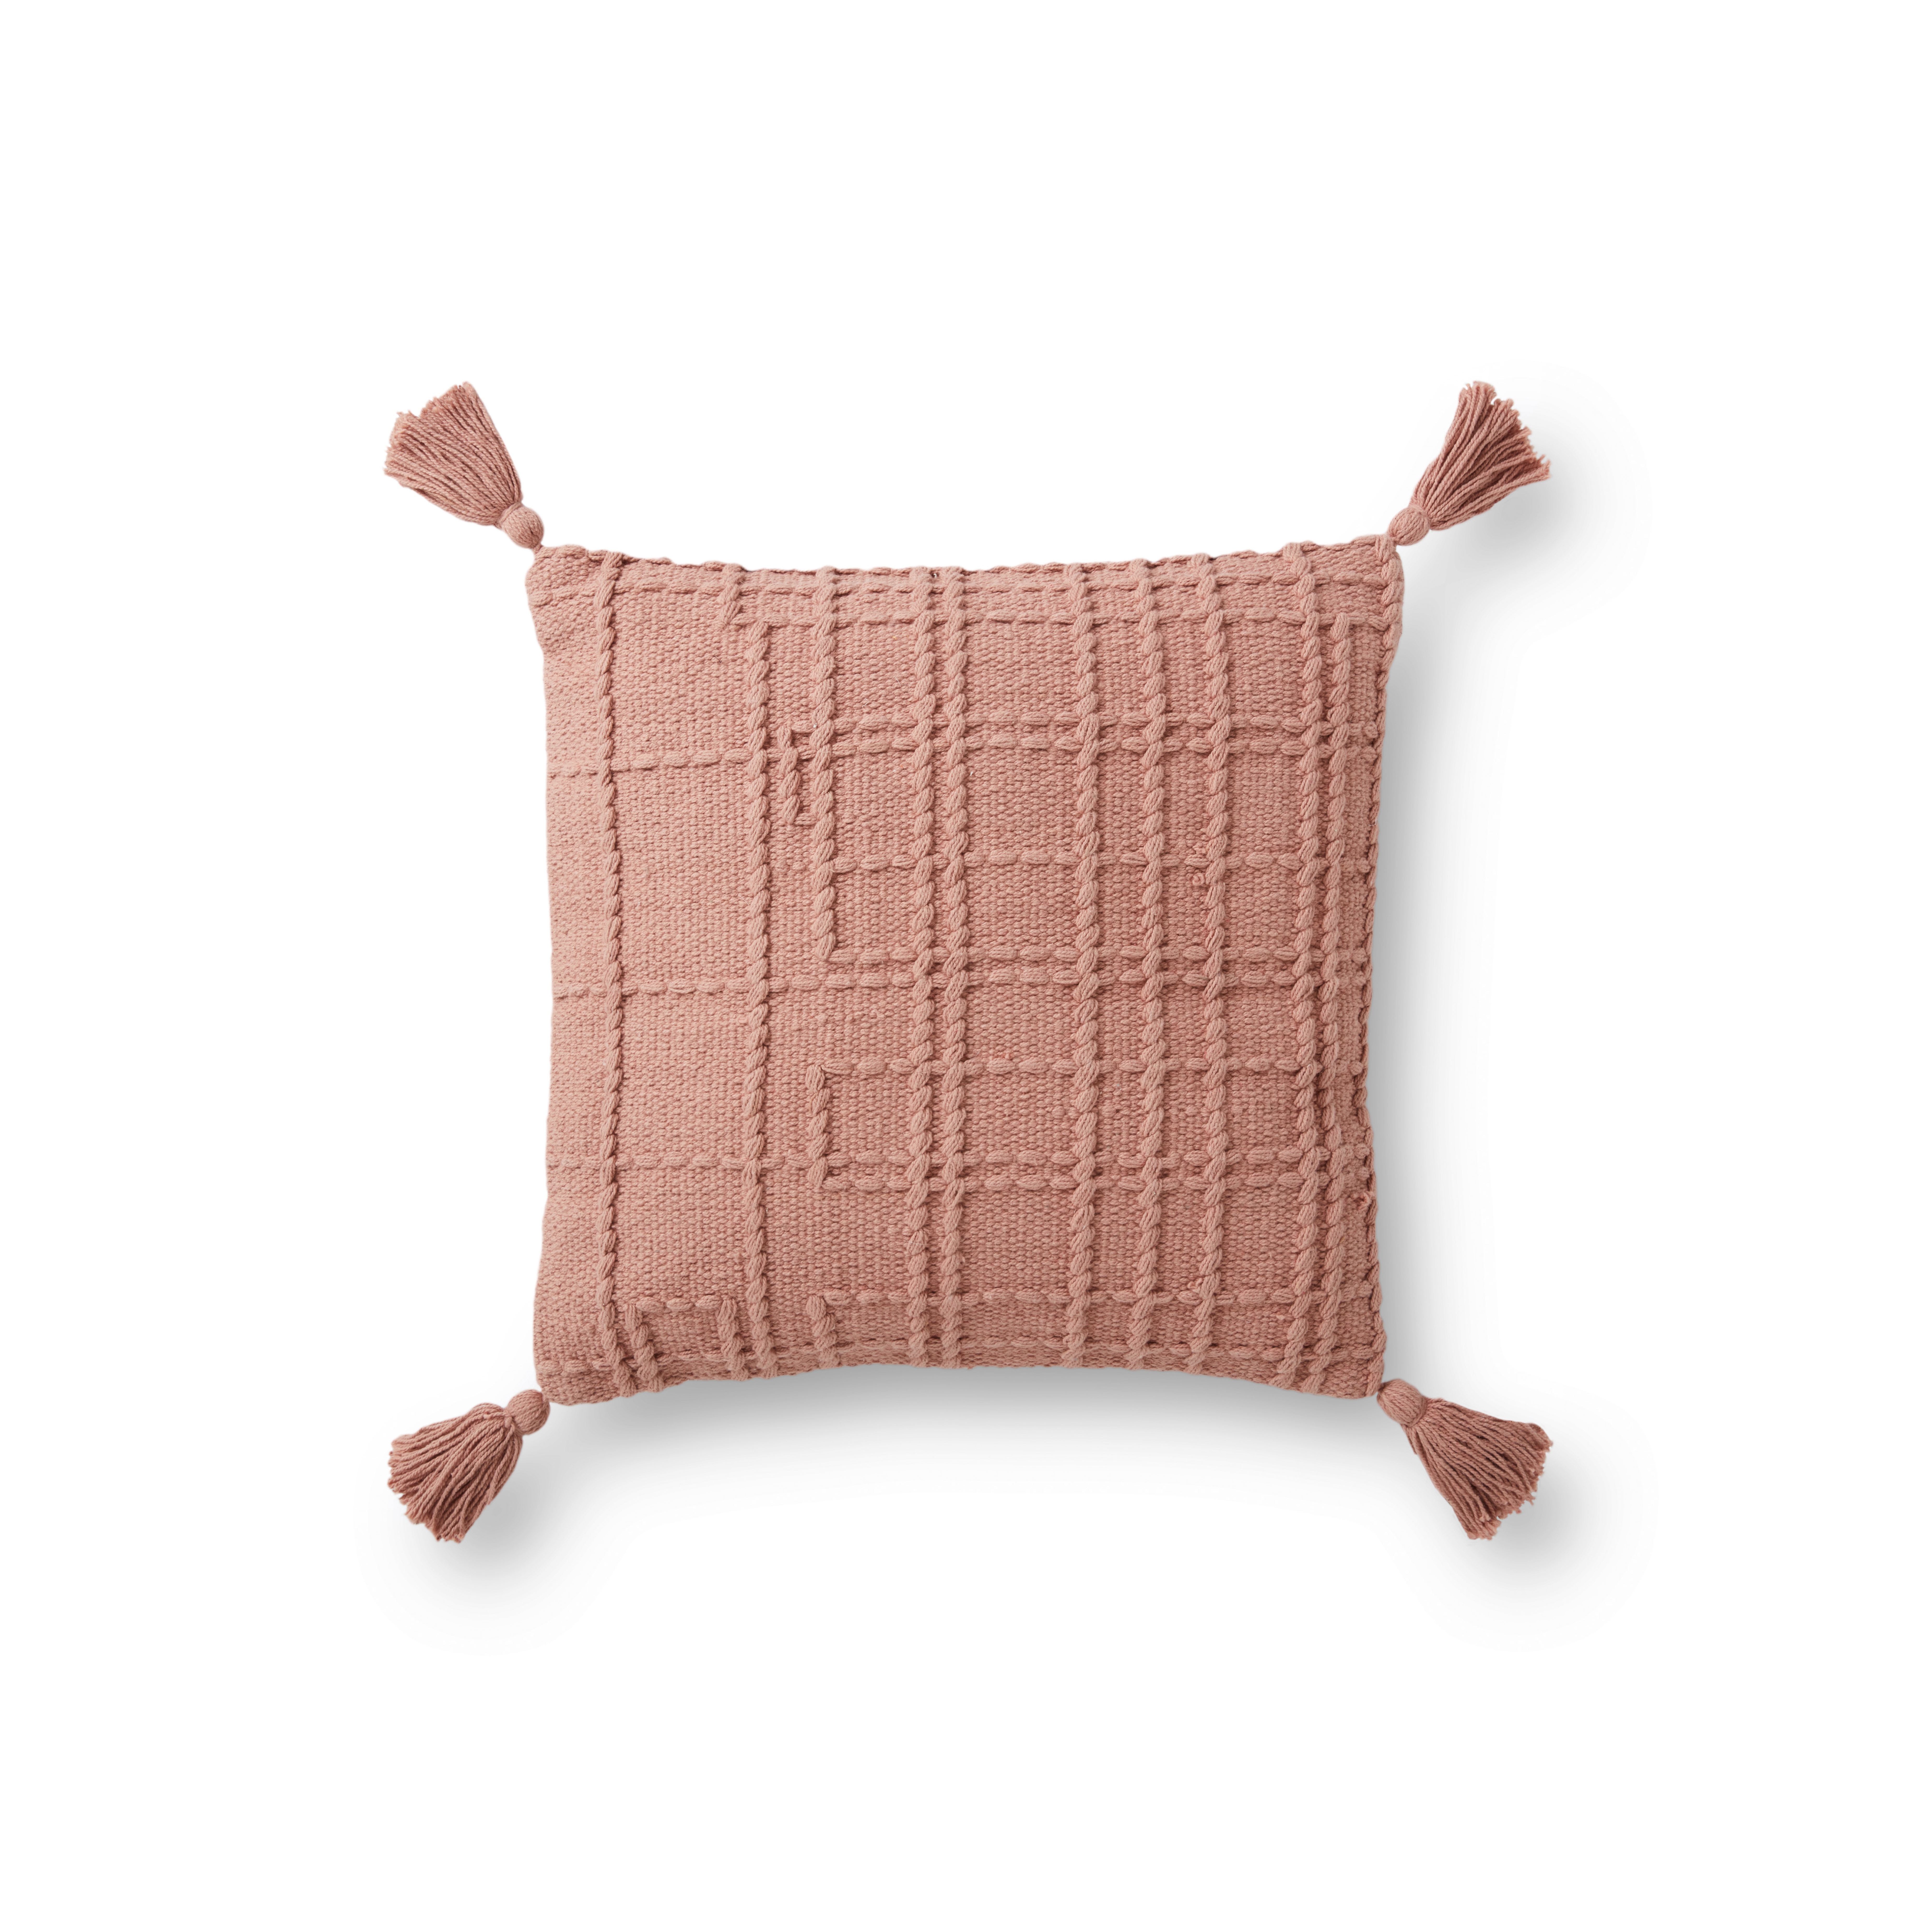 PILLOWS PMH0004 ROSE 18" x 18" Cover w/Down - Magnolia Home by Joana Gaines Crafted by Loloi Rugs